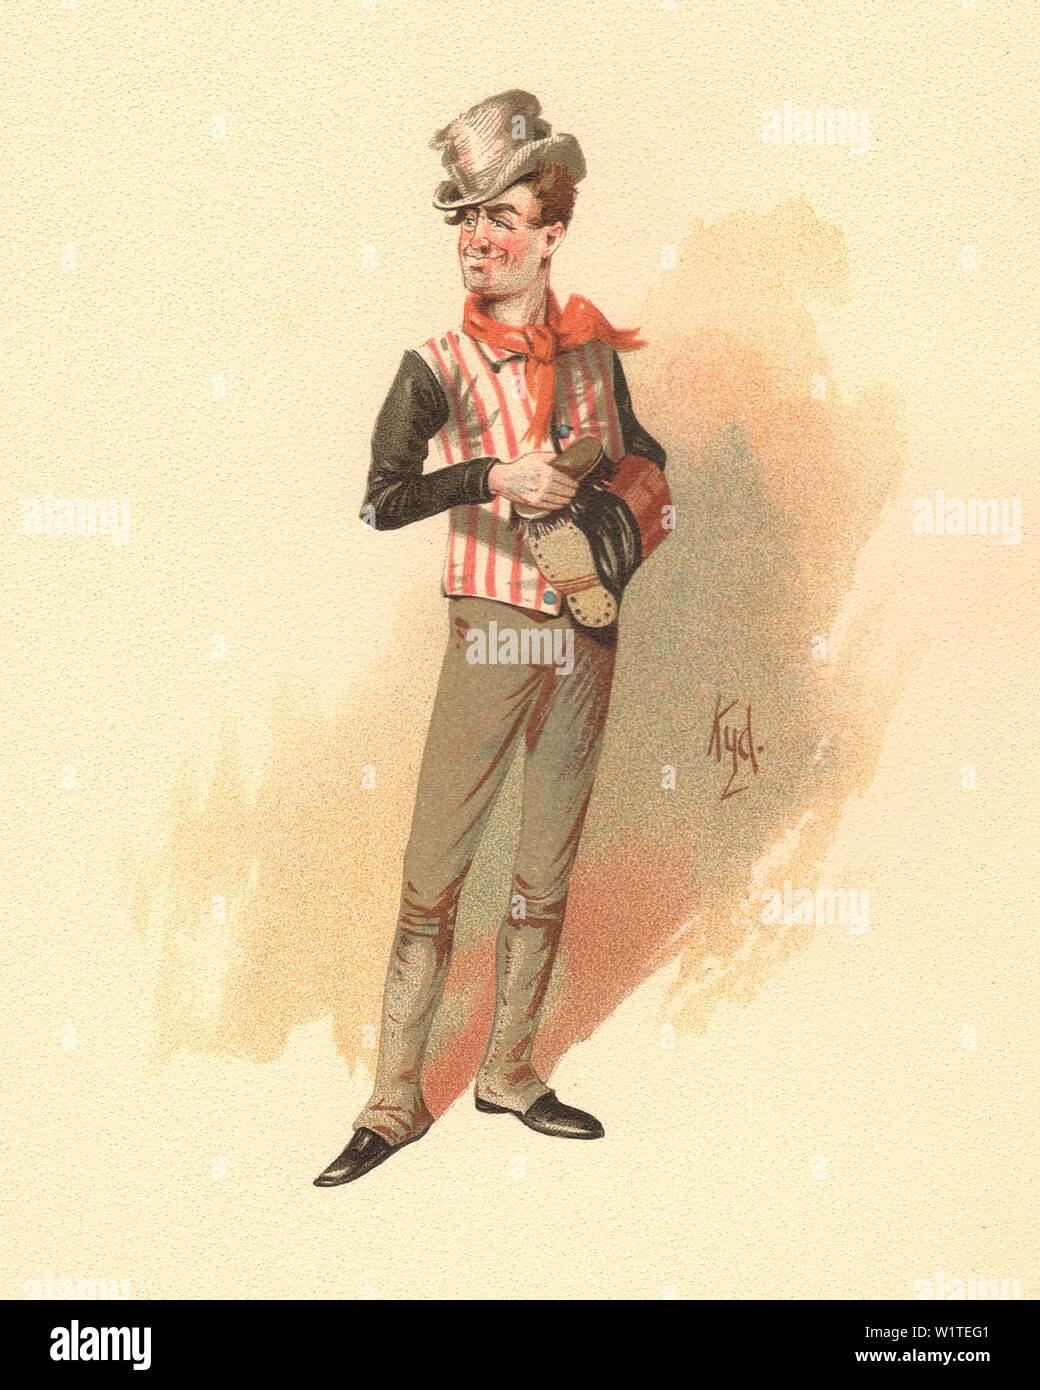 Sam Weller - The Pickwick Papers Character from “The Characters of Charles Dickens Pourtrayed in a Series of Original Water Colour Sketches by Kyd” Stock Photo